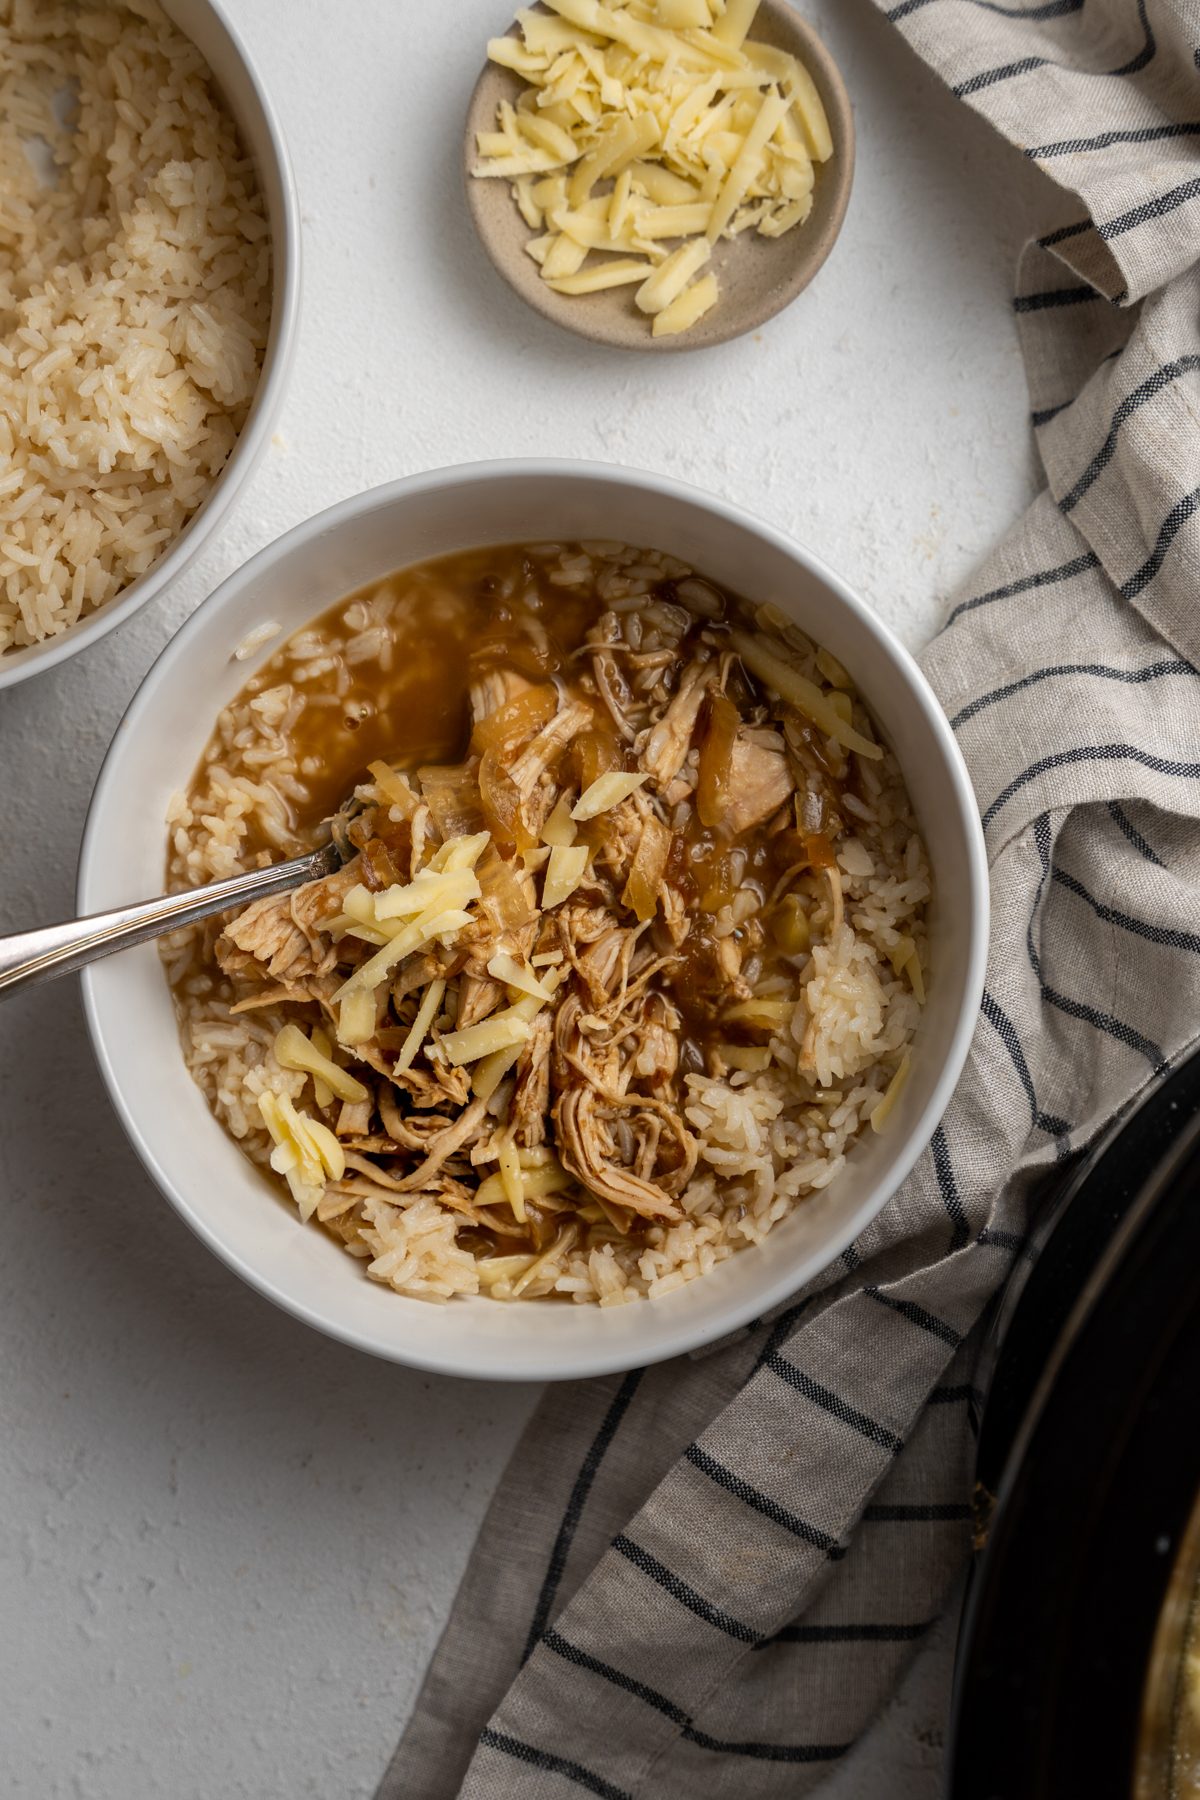 Spoon in a bowl of French onion chicken over rice.